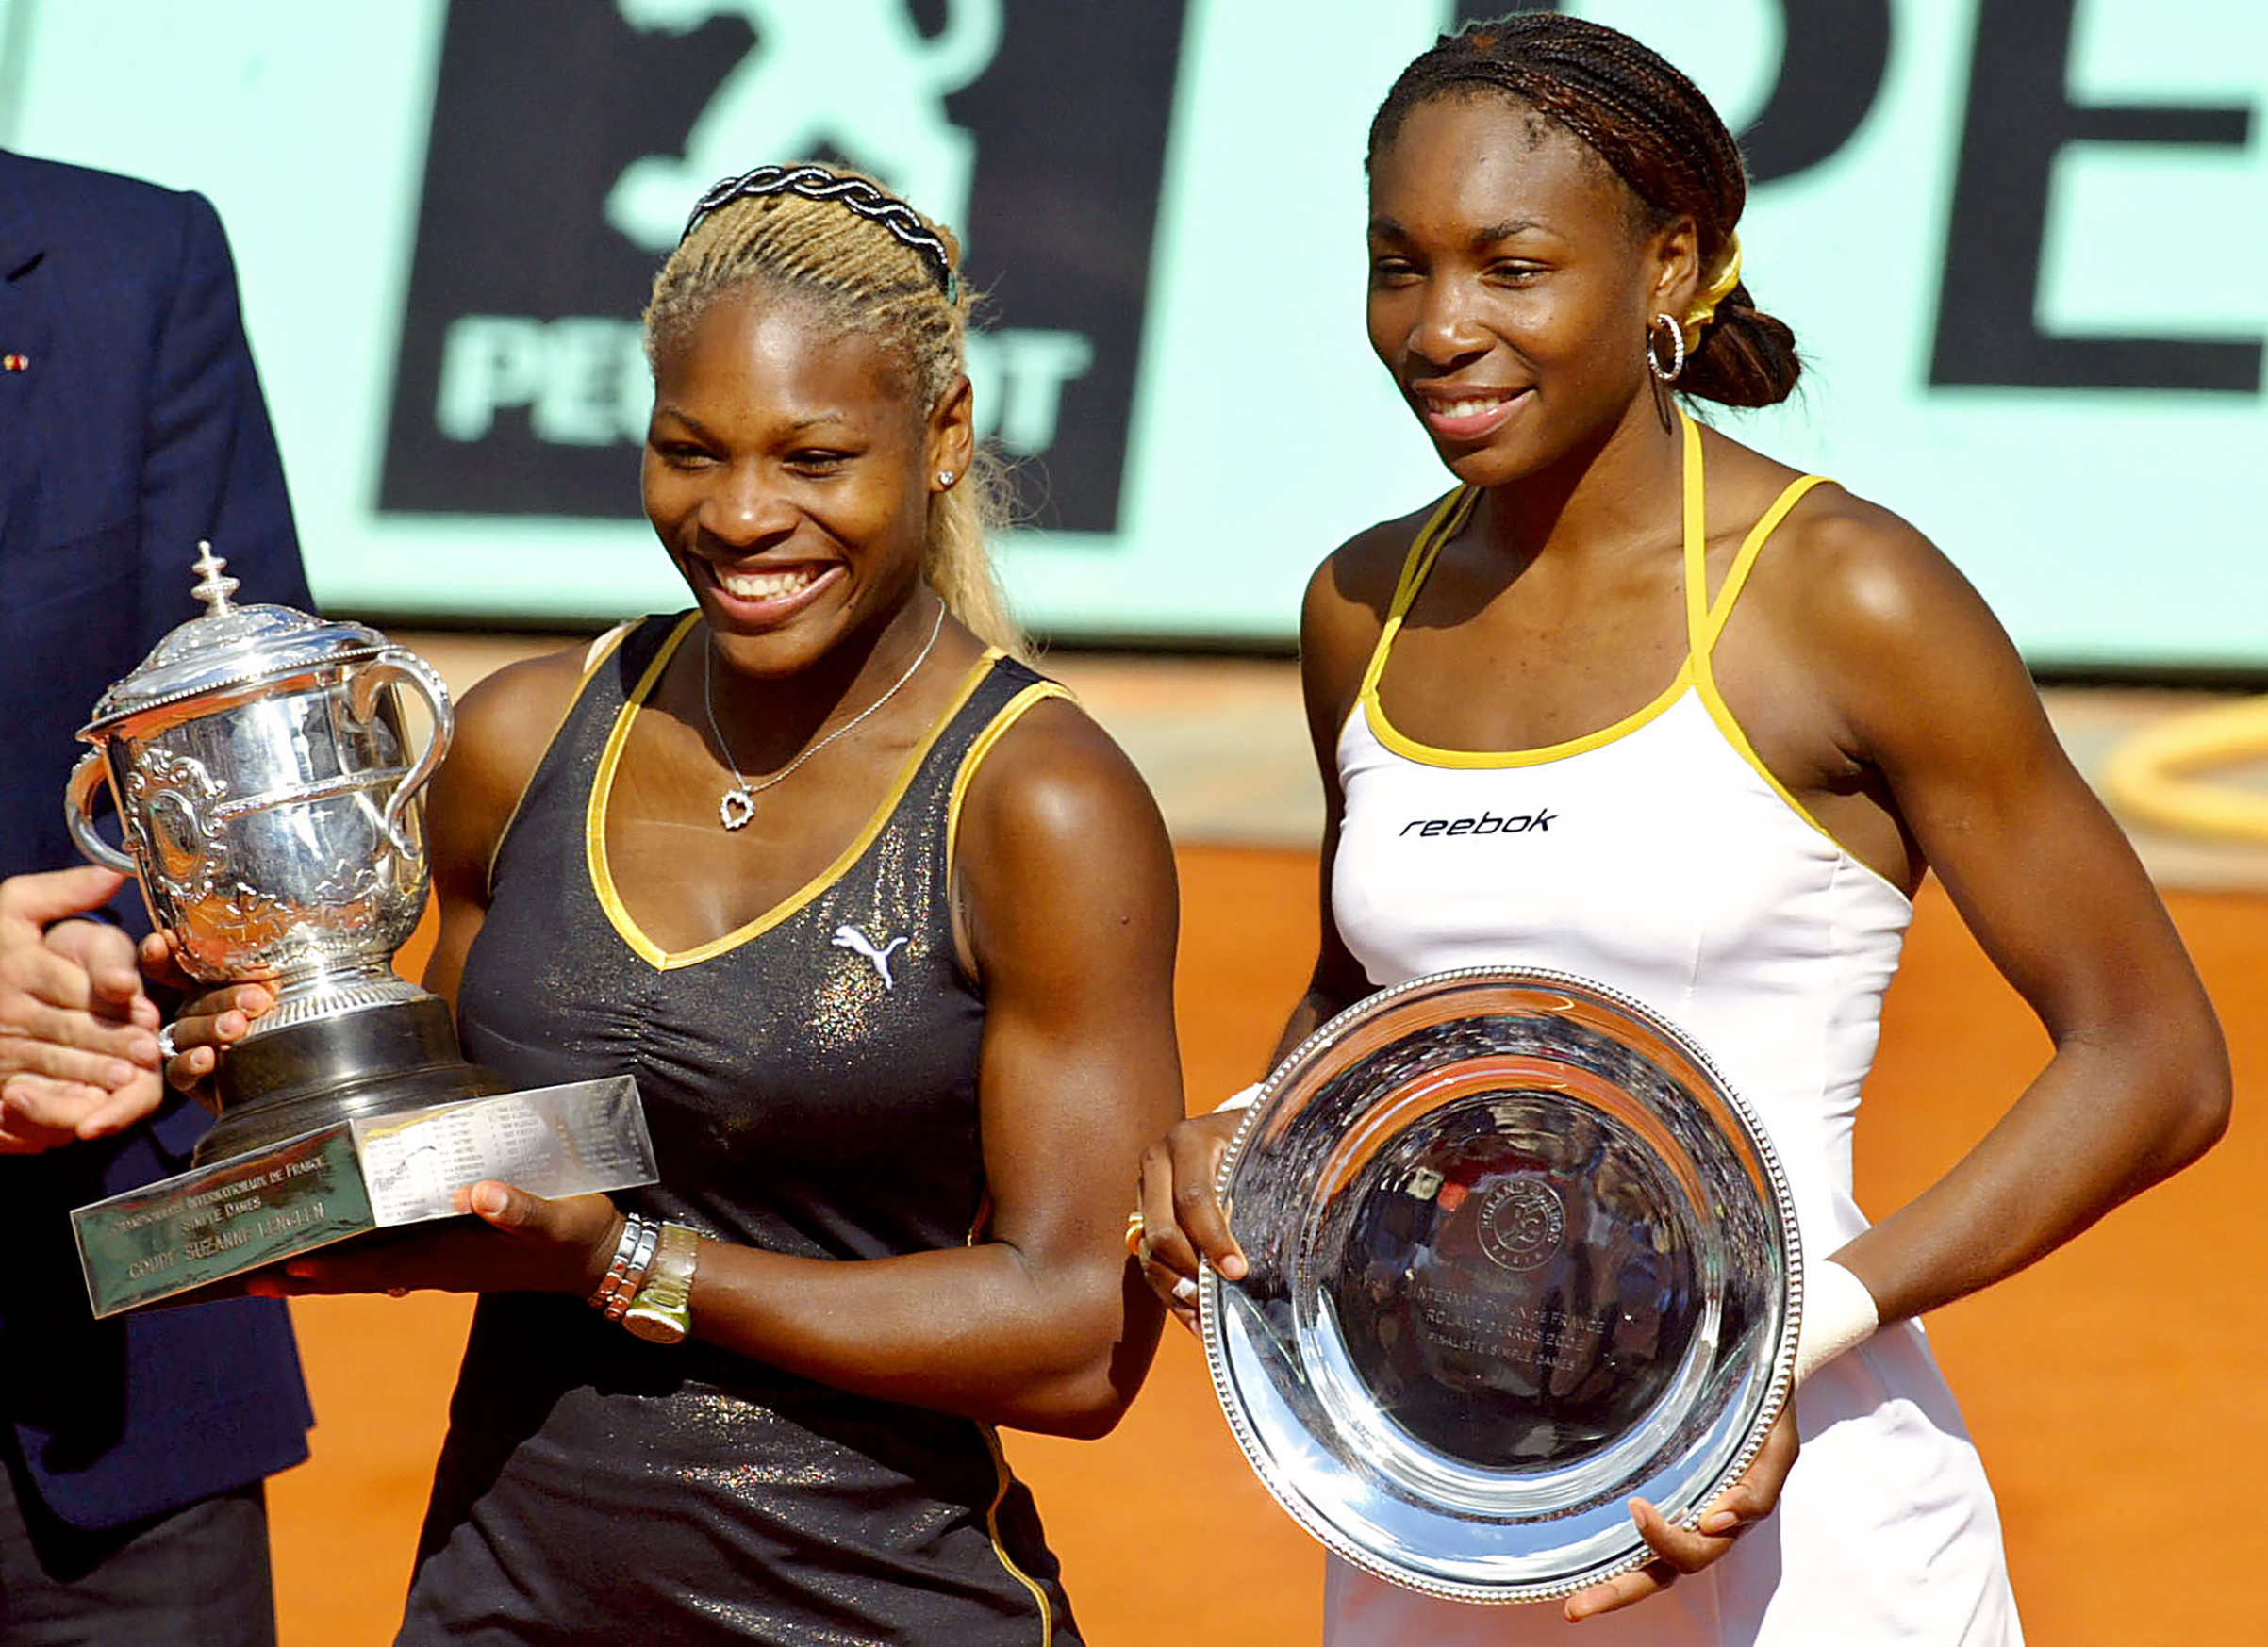 US Serena Williams (L) and her sister and opponent Venus Williams hold Roland Garros trophies, Jun 8, 2002 in Paris, at the end of the Roland Garros French Open women's final match. Serena won 7-5, 6-3. (ANDRE DURAND—AFP/Getty Images)